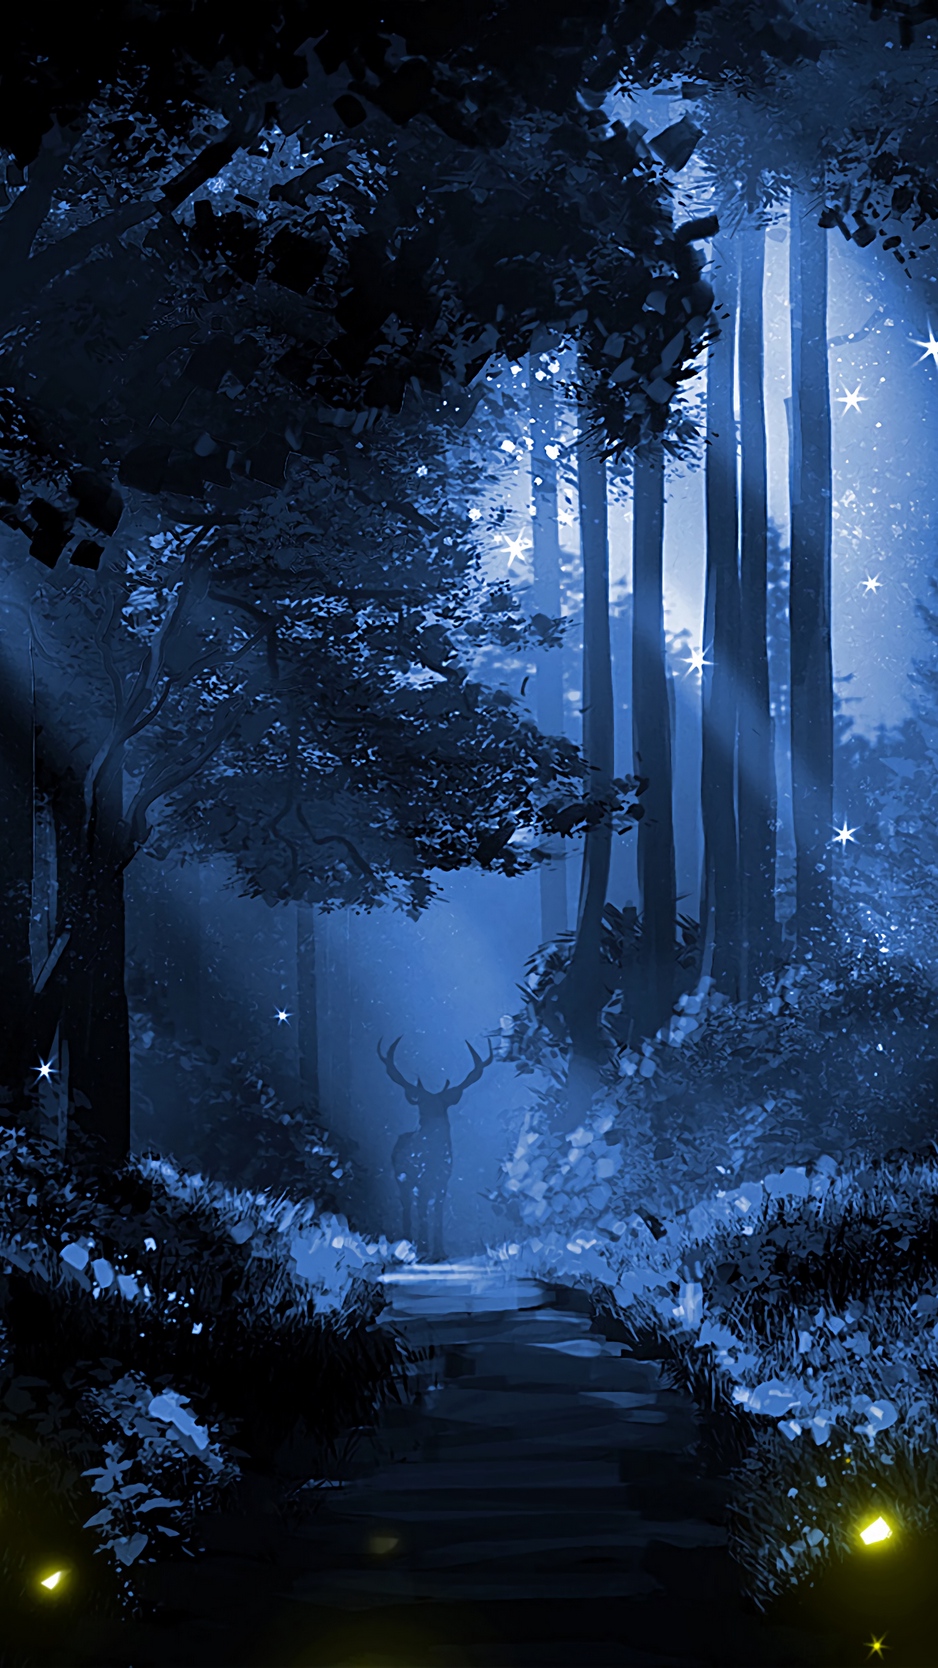 Free Download Wallpaper Deer Silhouette Forest Art Night Night Forest